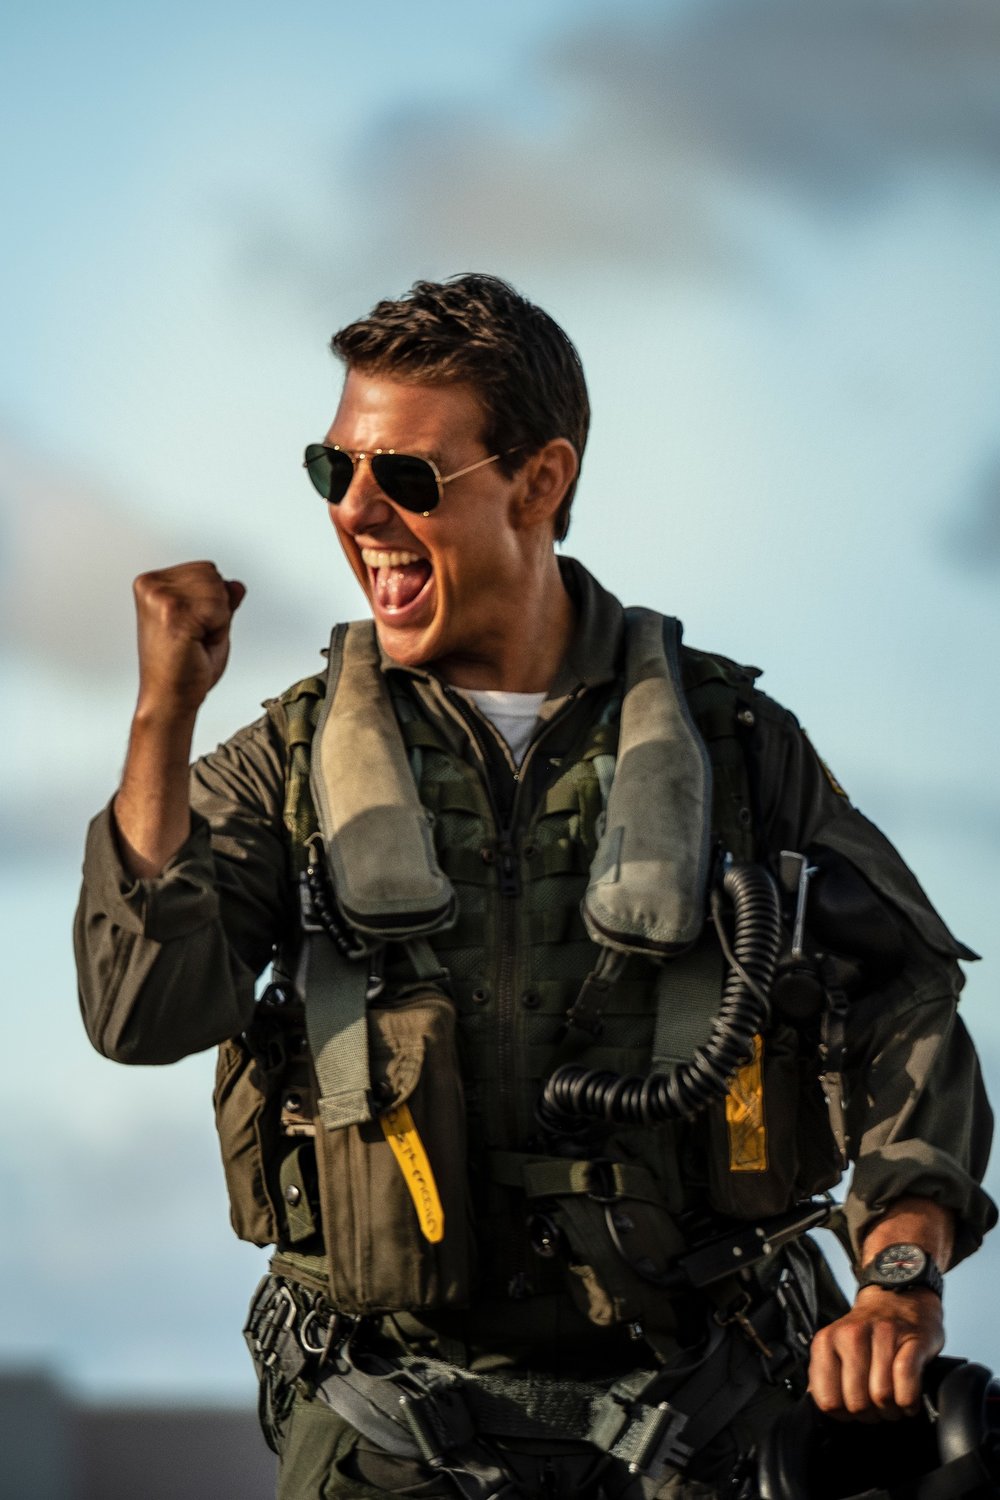 In the “Top Gun” sequel, Maverick (Tom Cruise) has been working as a test pilot but is facing the extinction of his role as unmanned planes and drones are phased in.